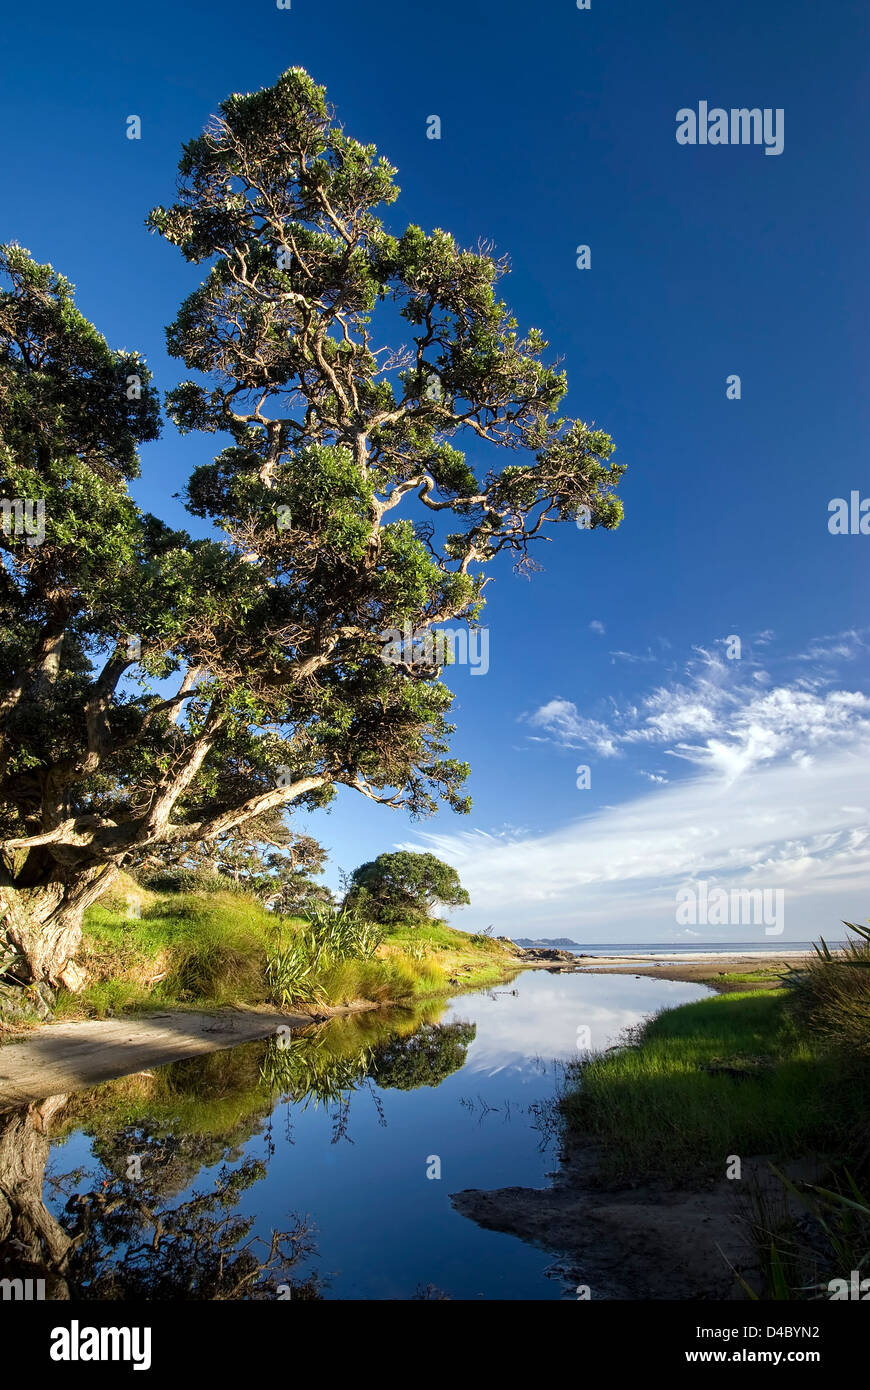 River flowing to the sea, with large Pohutukawa tree. North island, New Zealand Stock Photo